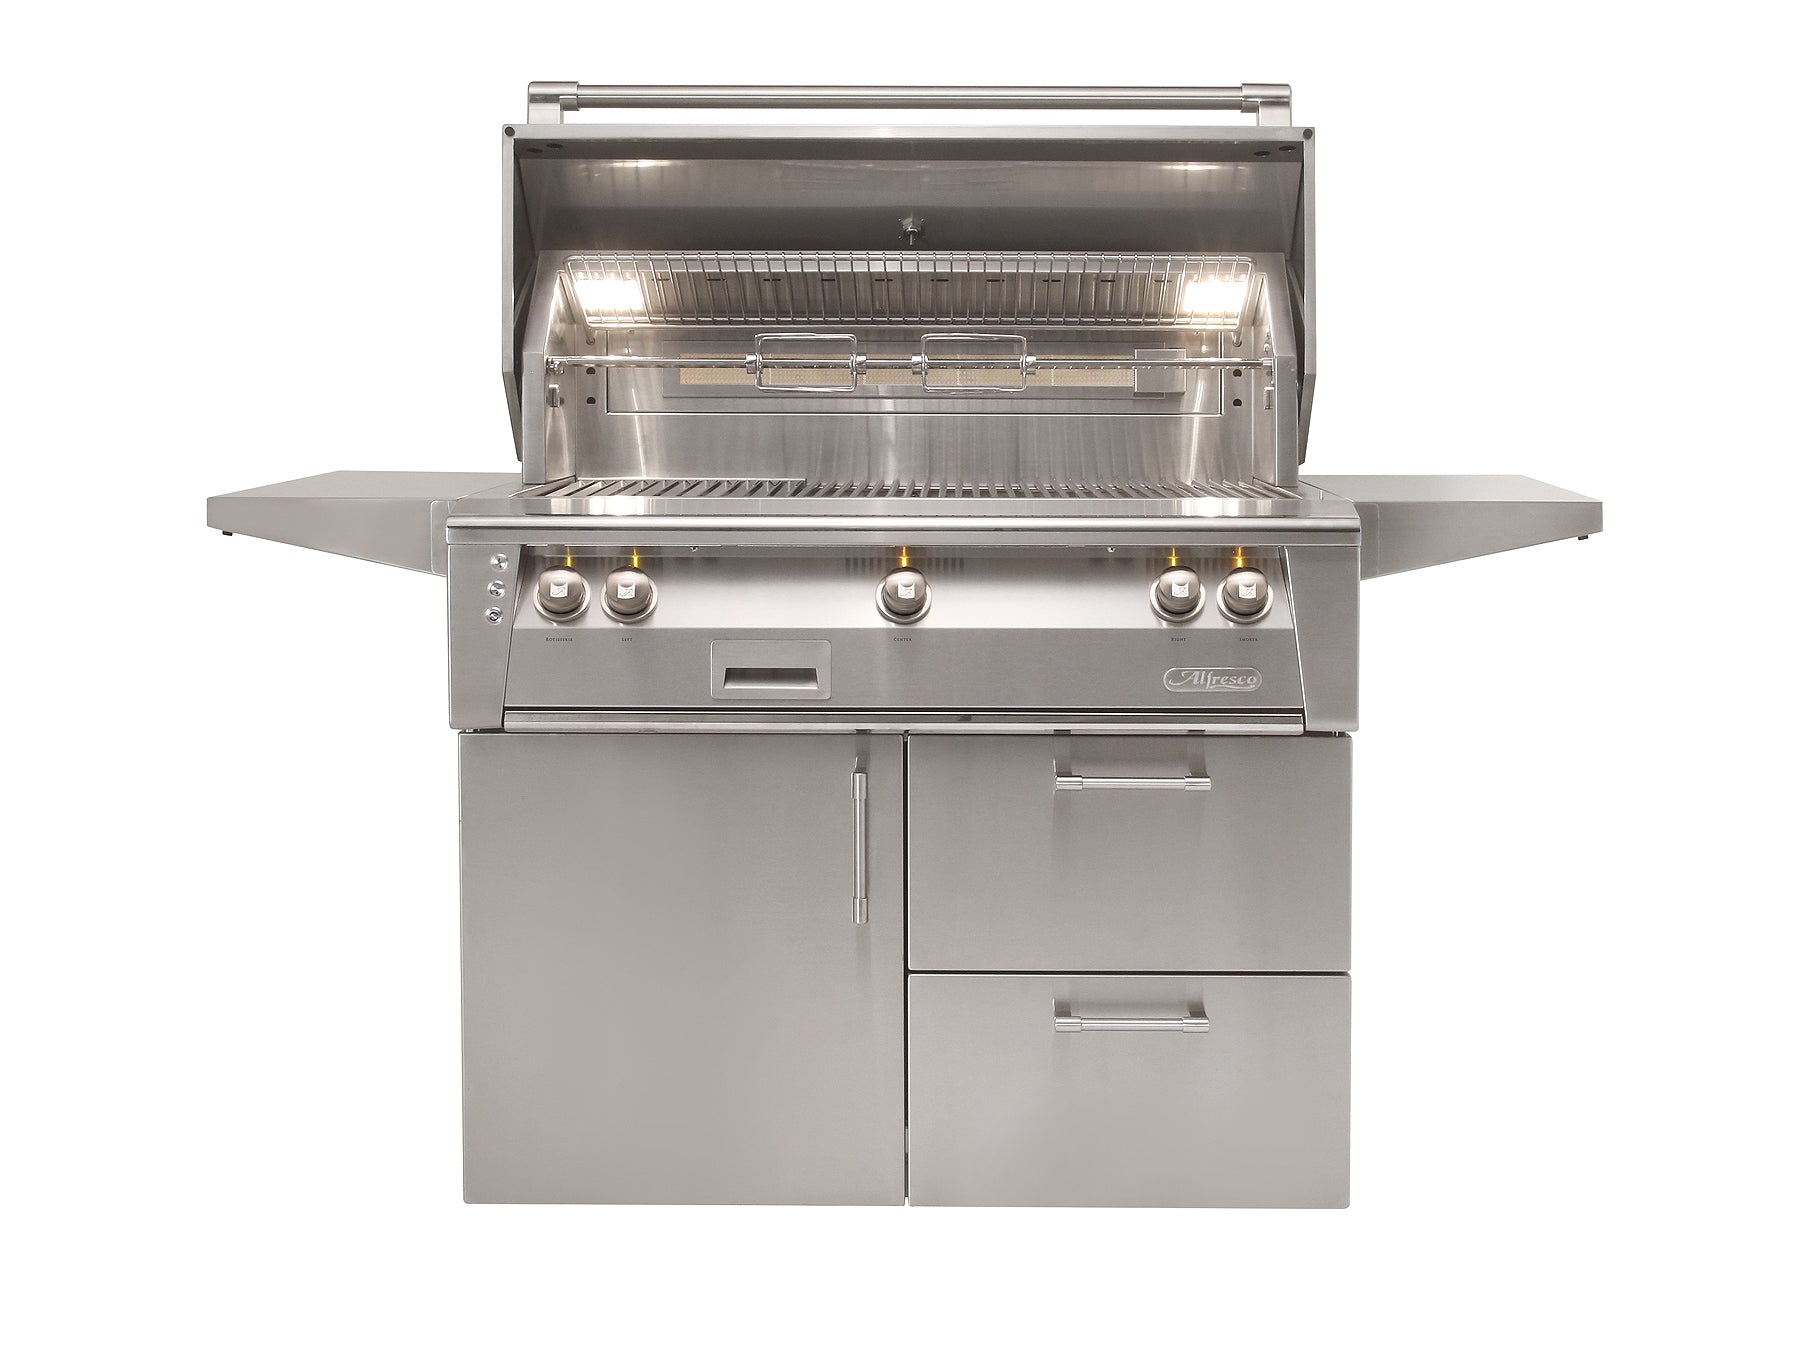 Alfresco - 3 Burner Natural Gas BBQ in Stainless - ALXE-42SZCD